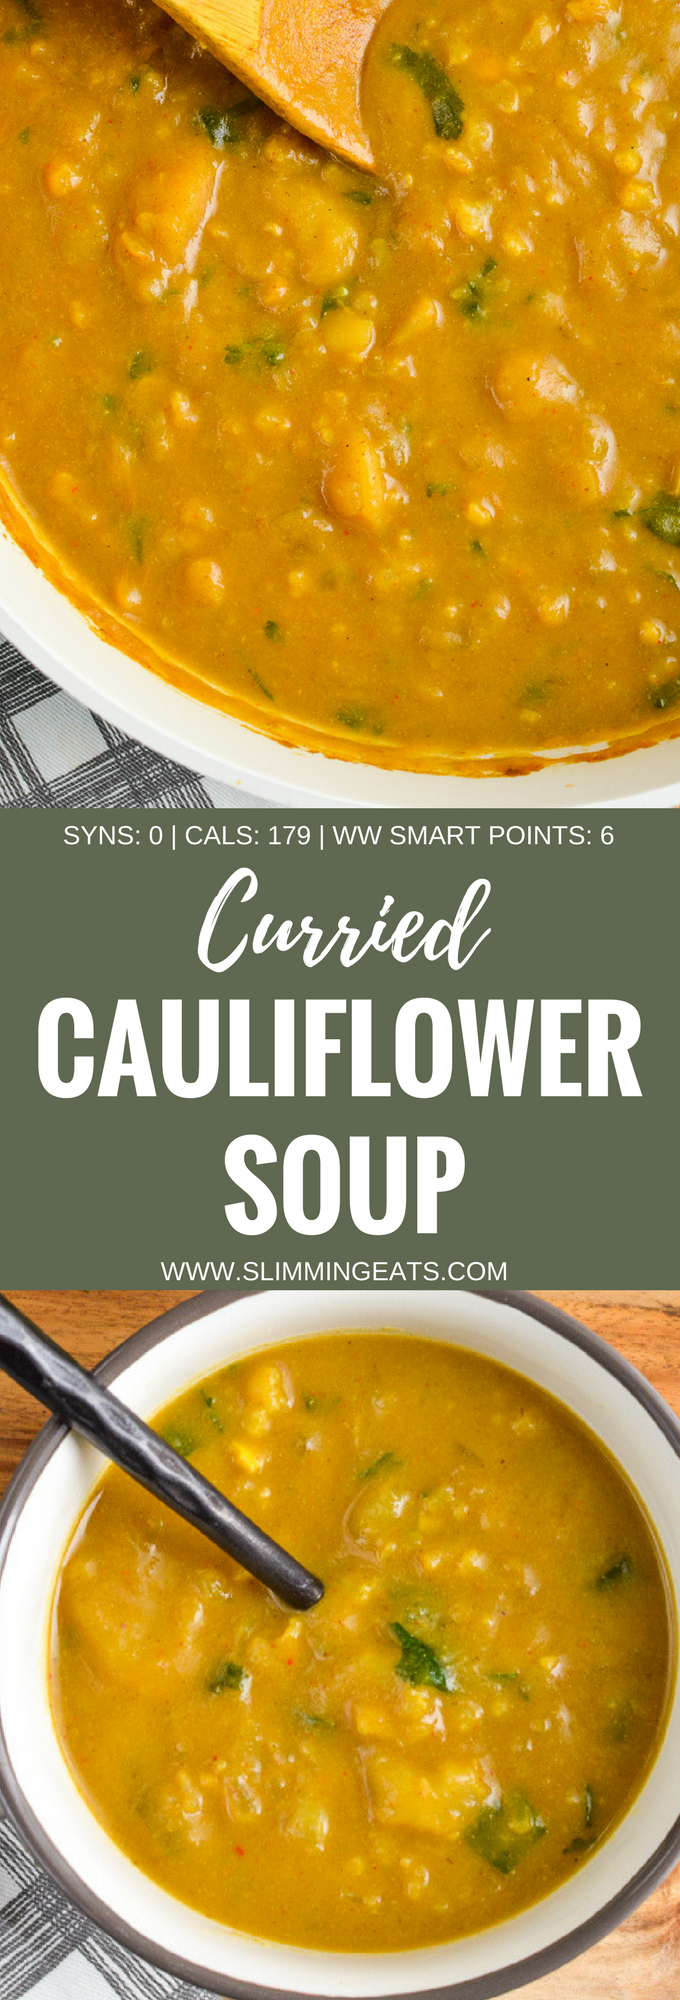 Slimming Eats Syn Free Curried Cauliflower Soup - gluten free, dairy free, vegan, Slimming World and Weight Watchers friendly